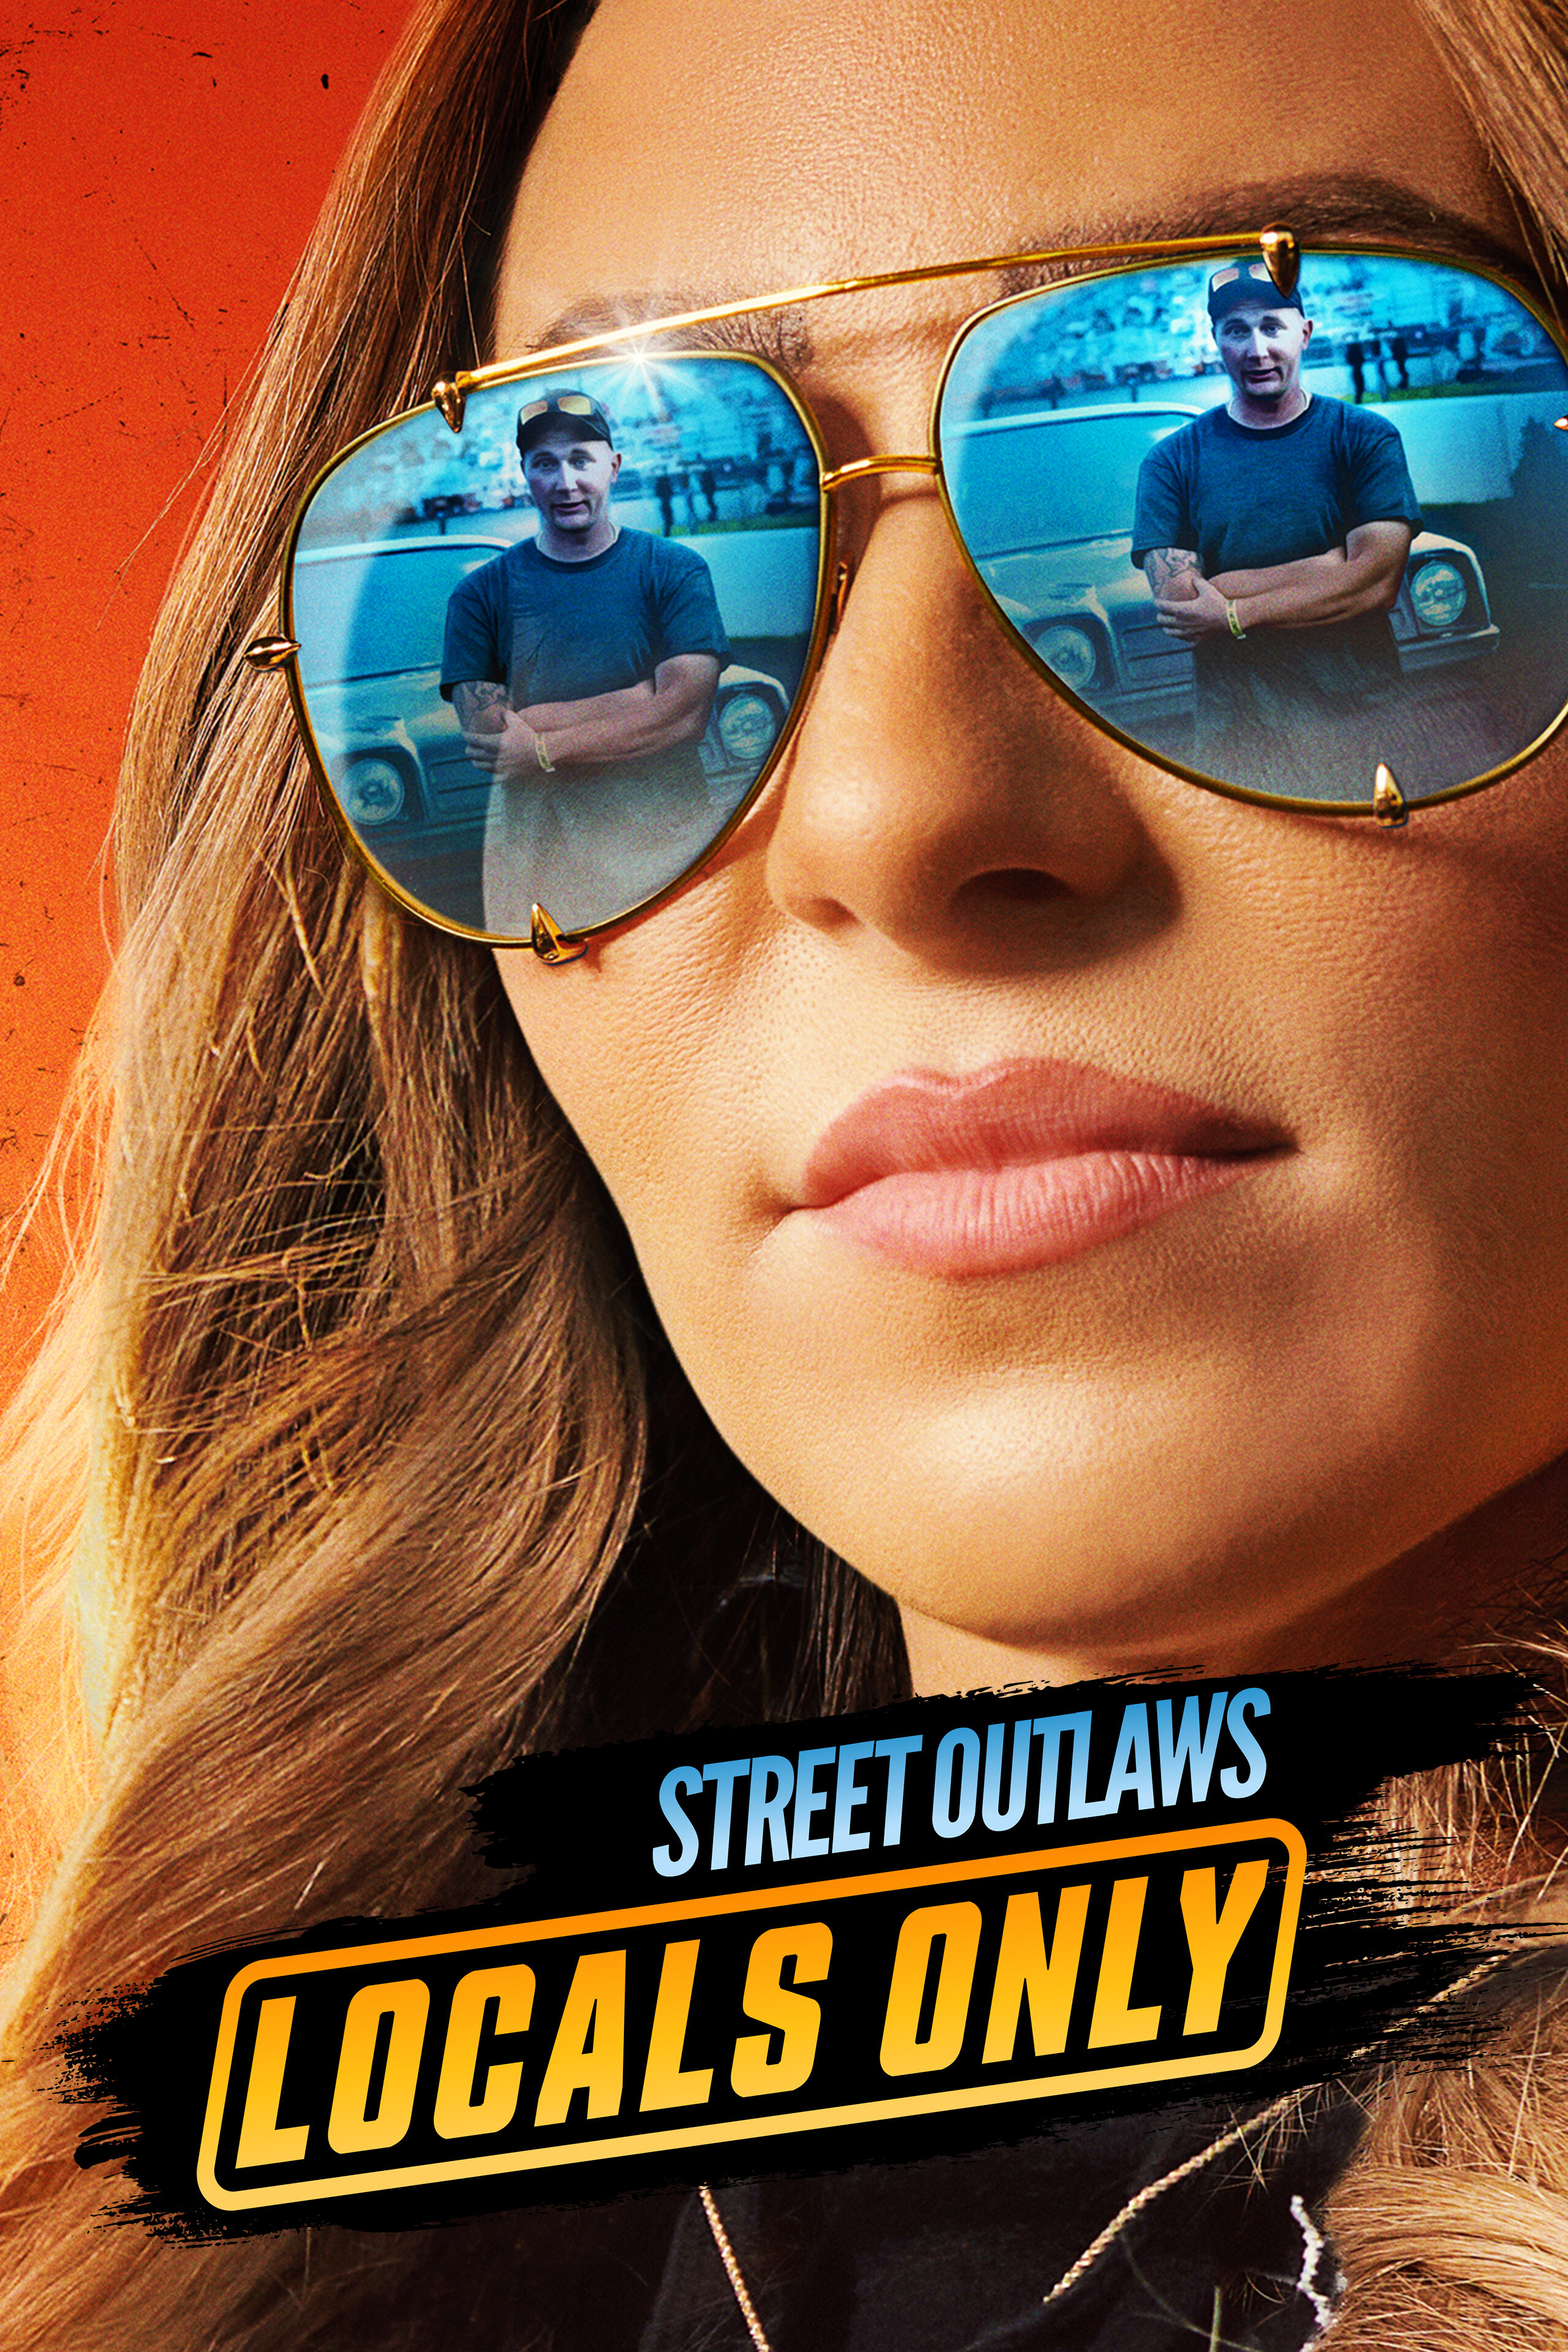 Street Outlaws: Locals Only ne zaman